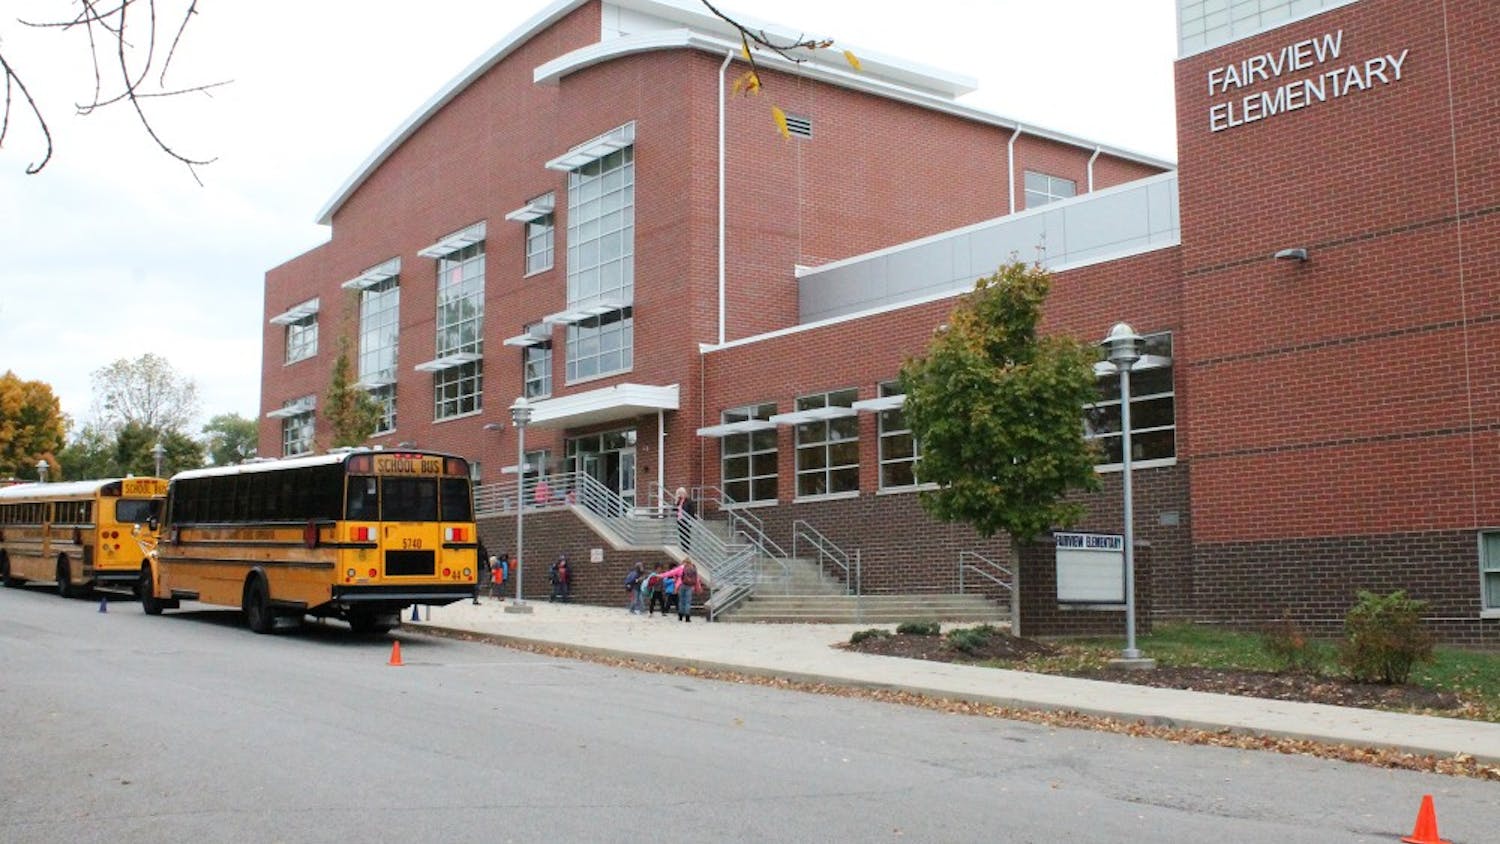 Students load onto buses after school outside Fairview Elementary last year. Monroe County Community School Corporation started a new series Thursday that will focus on the opioid crisis and youth substance abuse prevention.